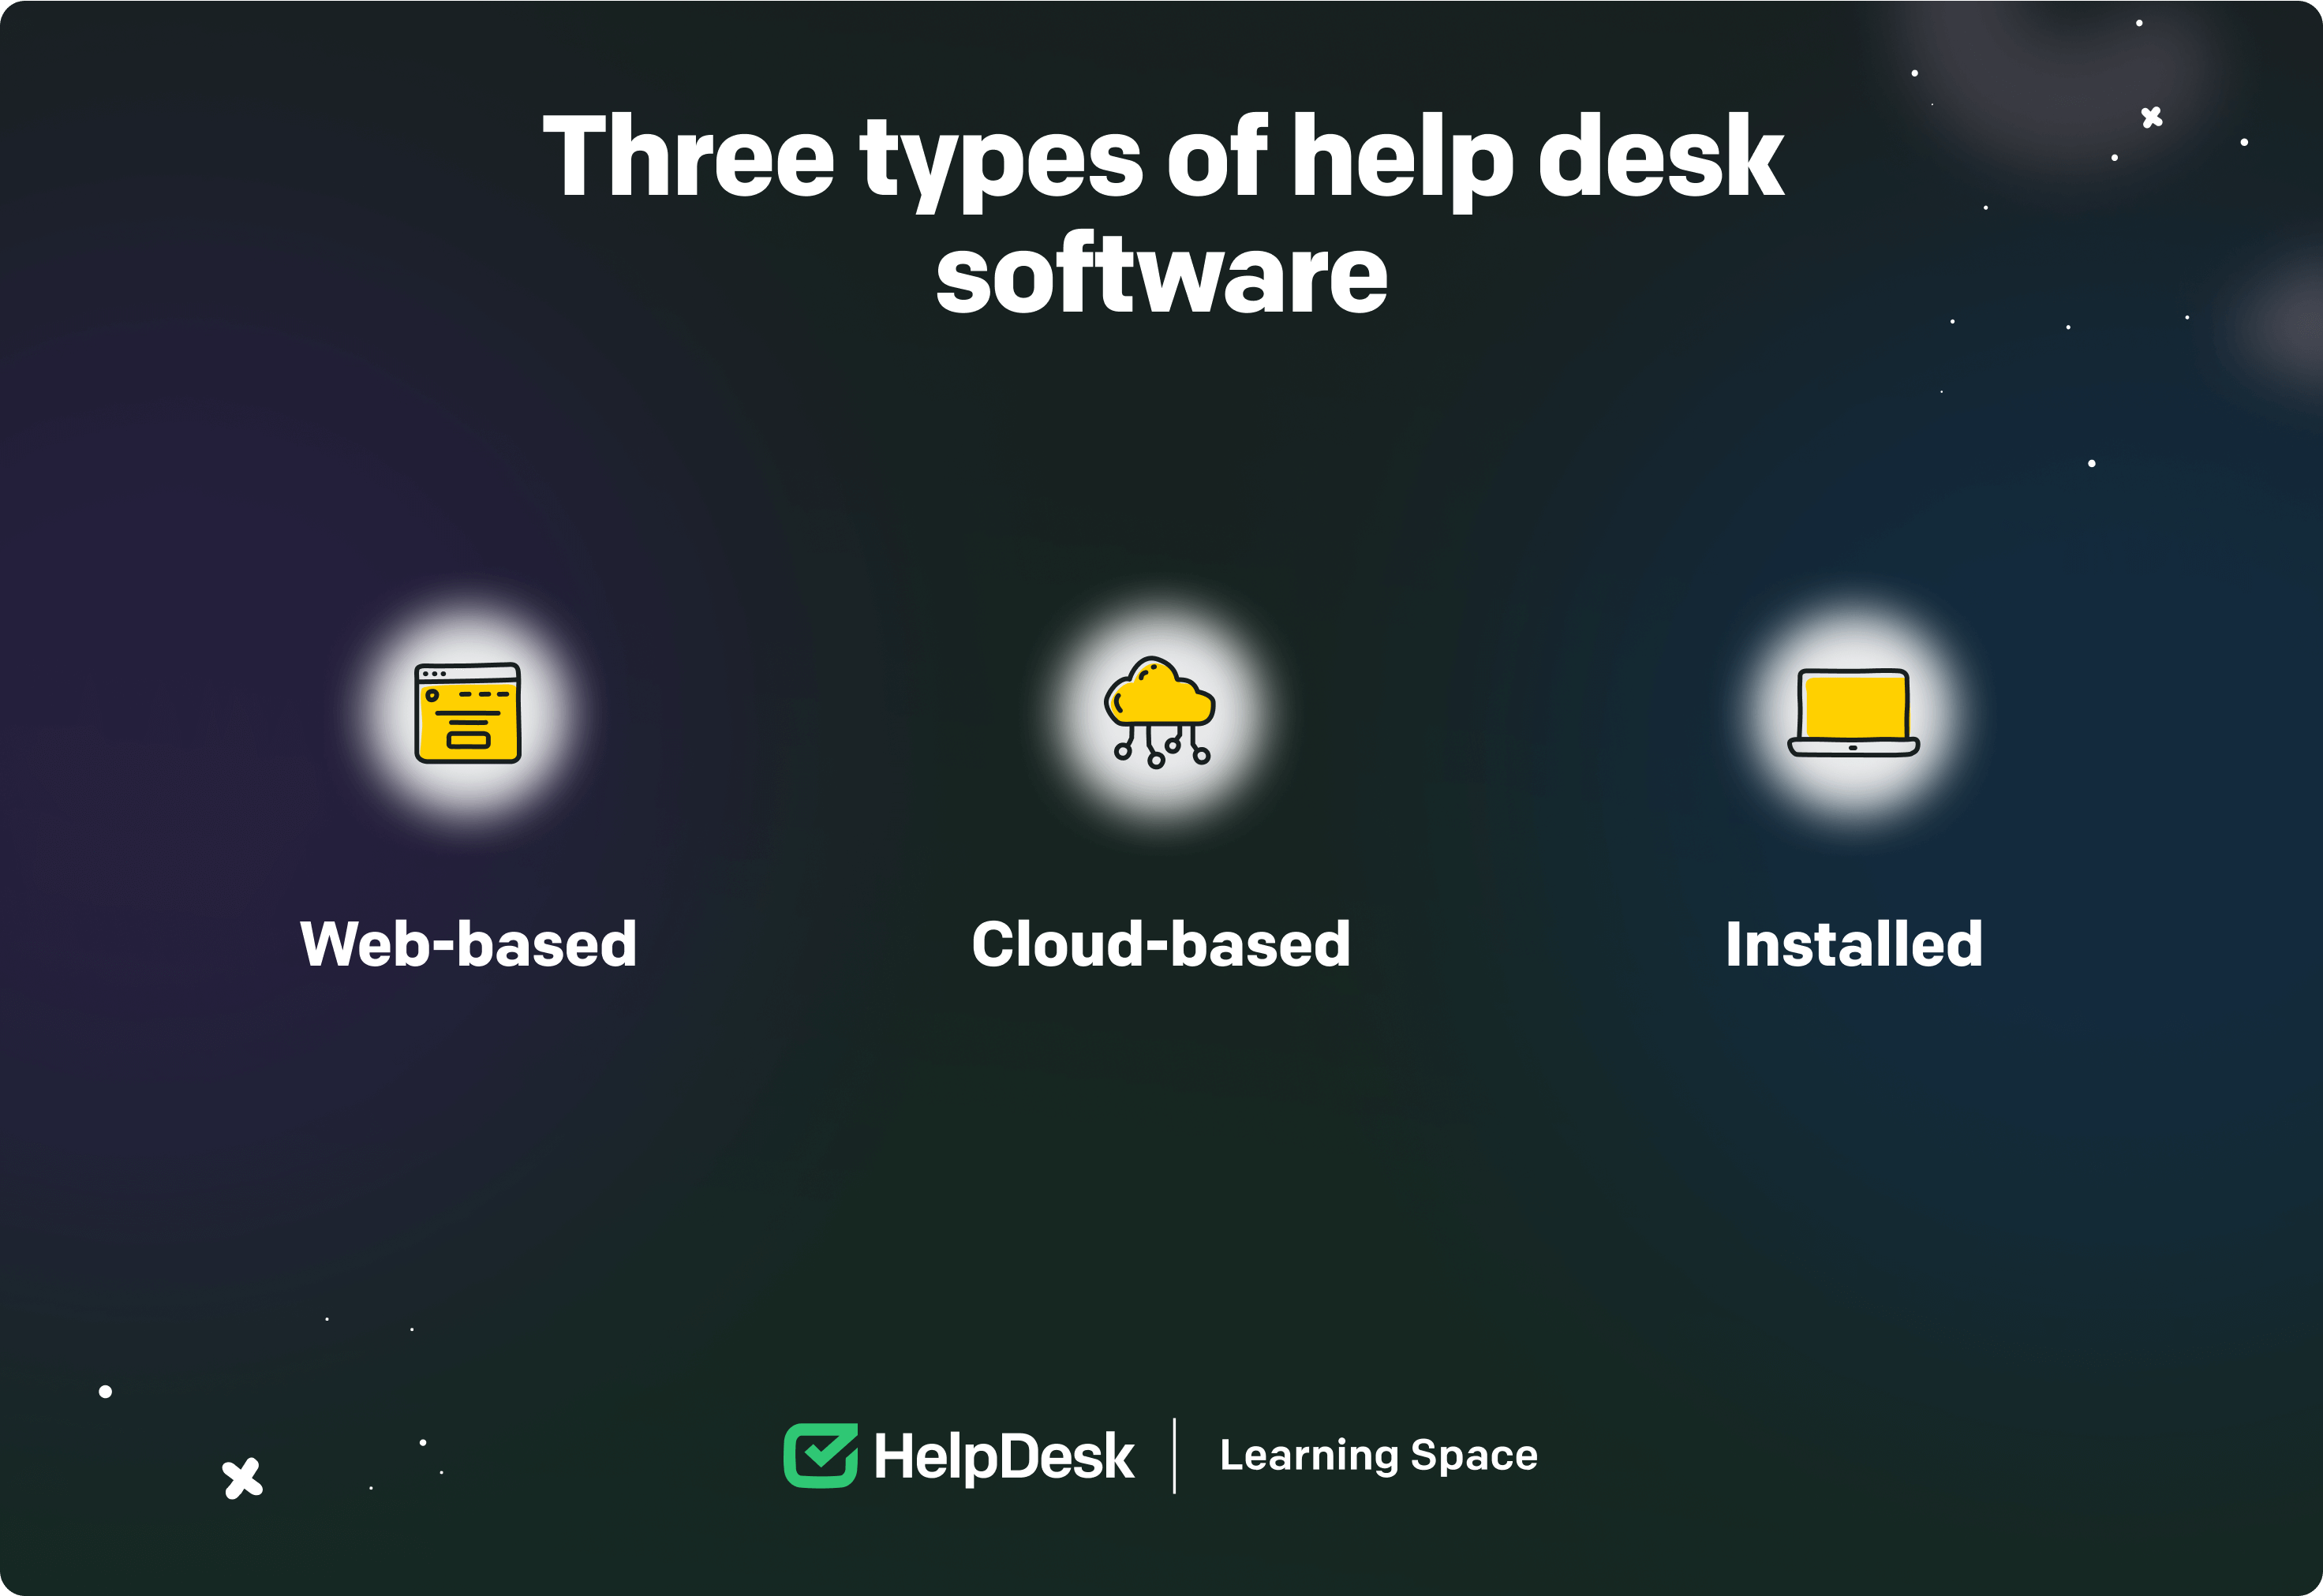 Three types of help desk software: Web-based, Cloud-based, and Locally Installed.